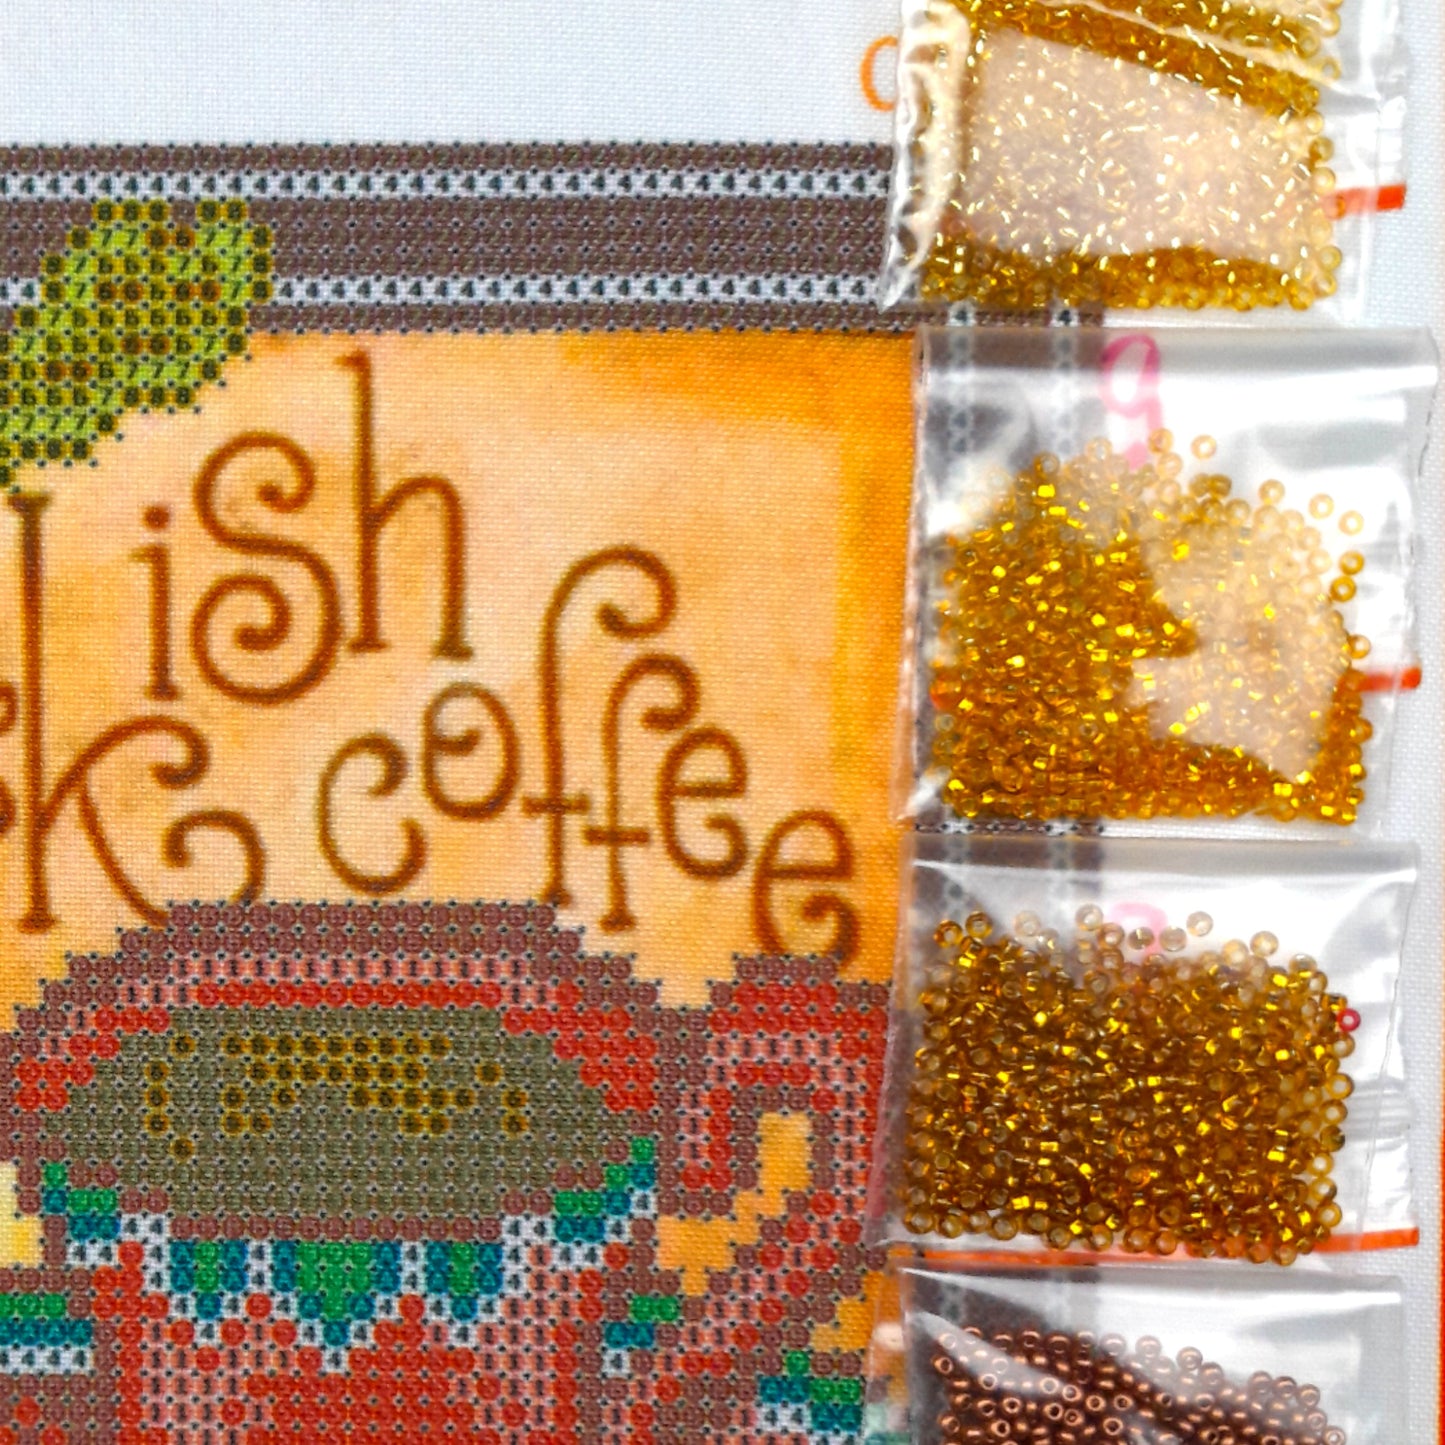 DIY Bead embroidery kit "Turkish coffee". size: 6.3 - 6.3in (16 - 16cm). - VadymShop